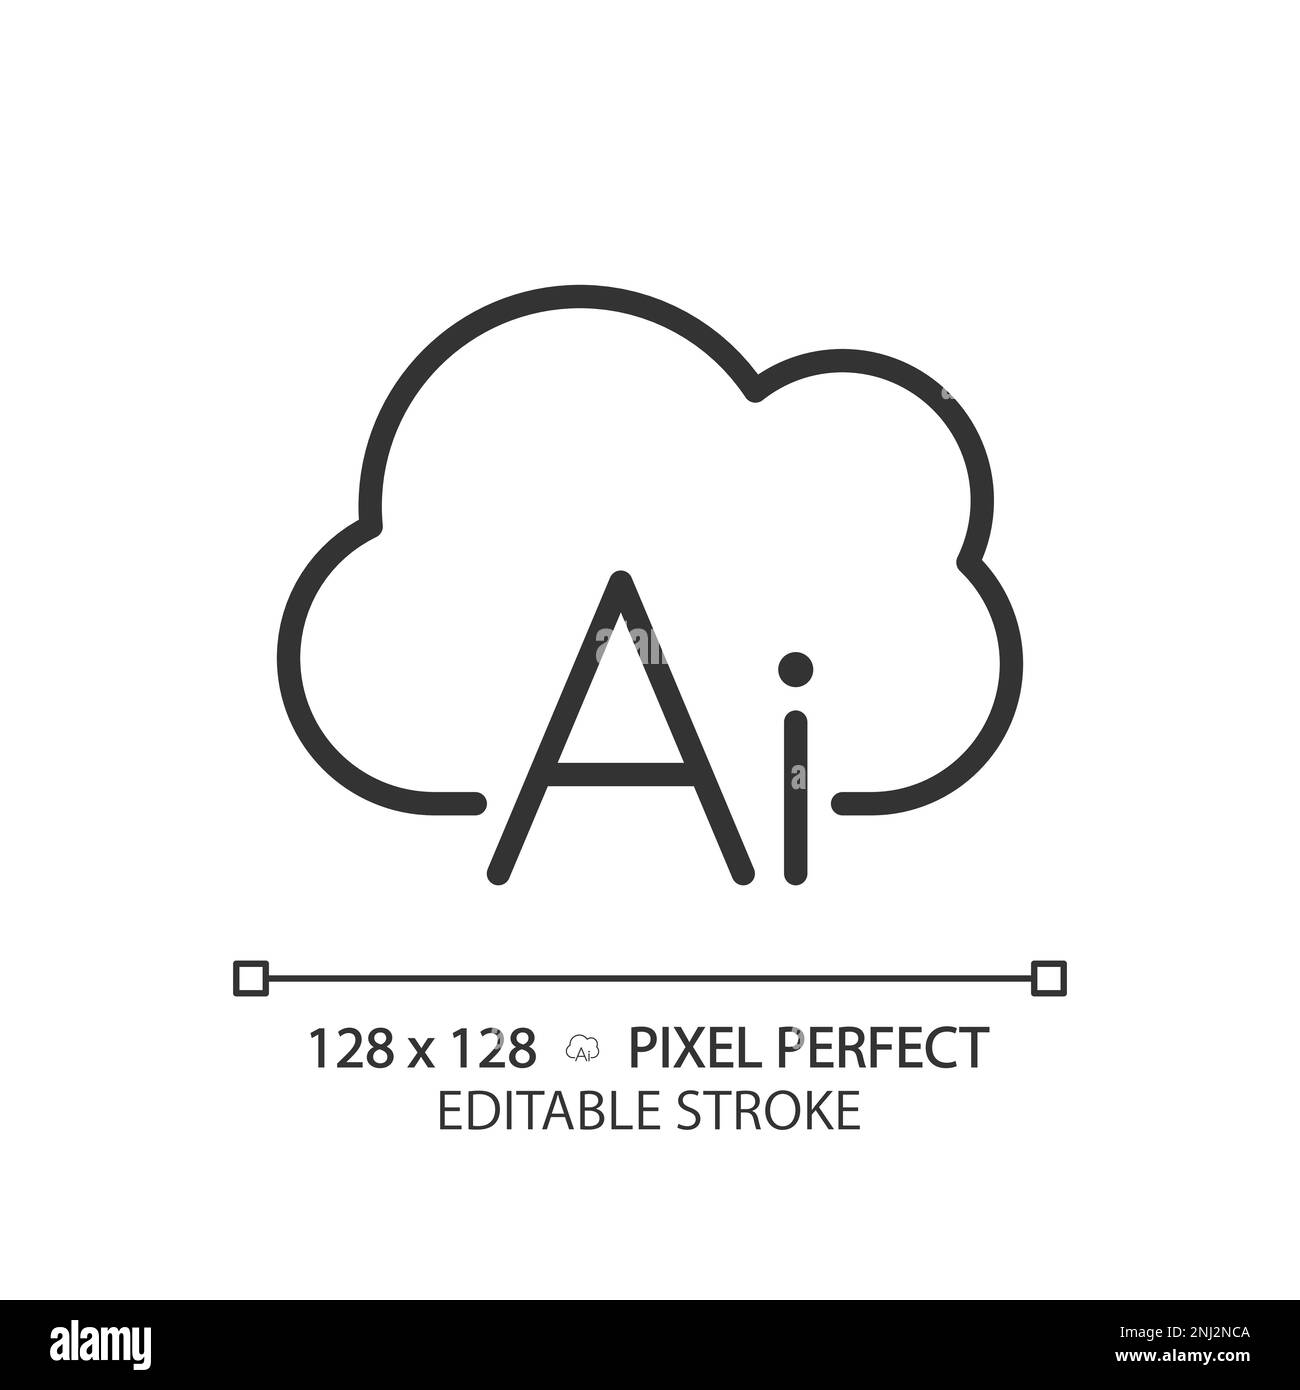 Cloud based AI pixel perfect linear icon Stock Vector